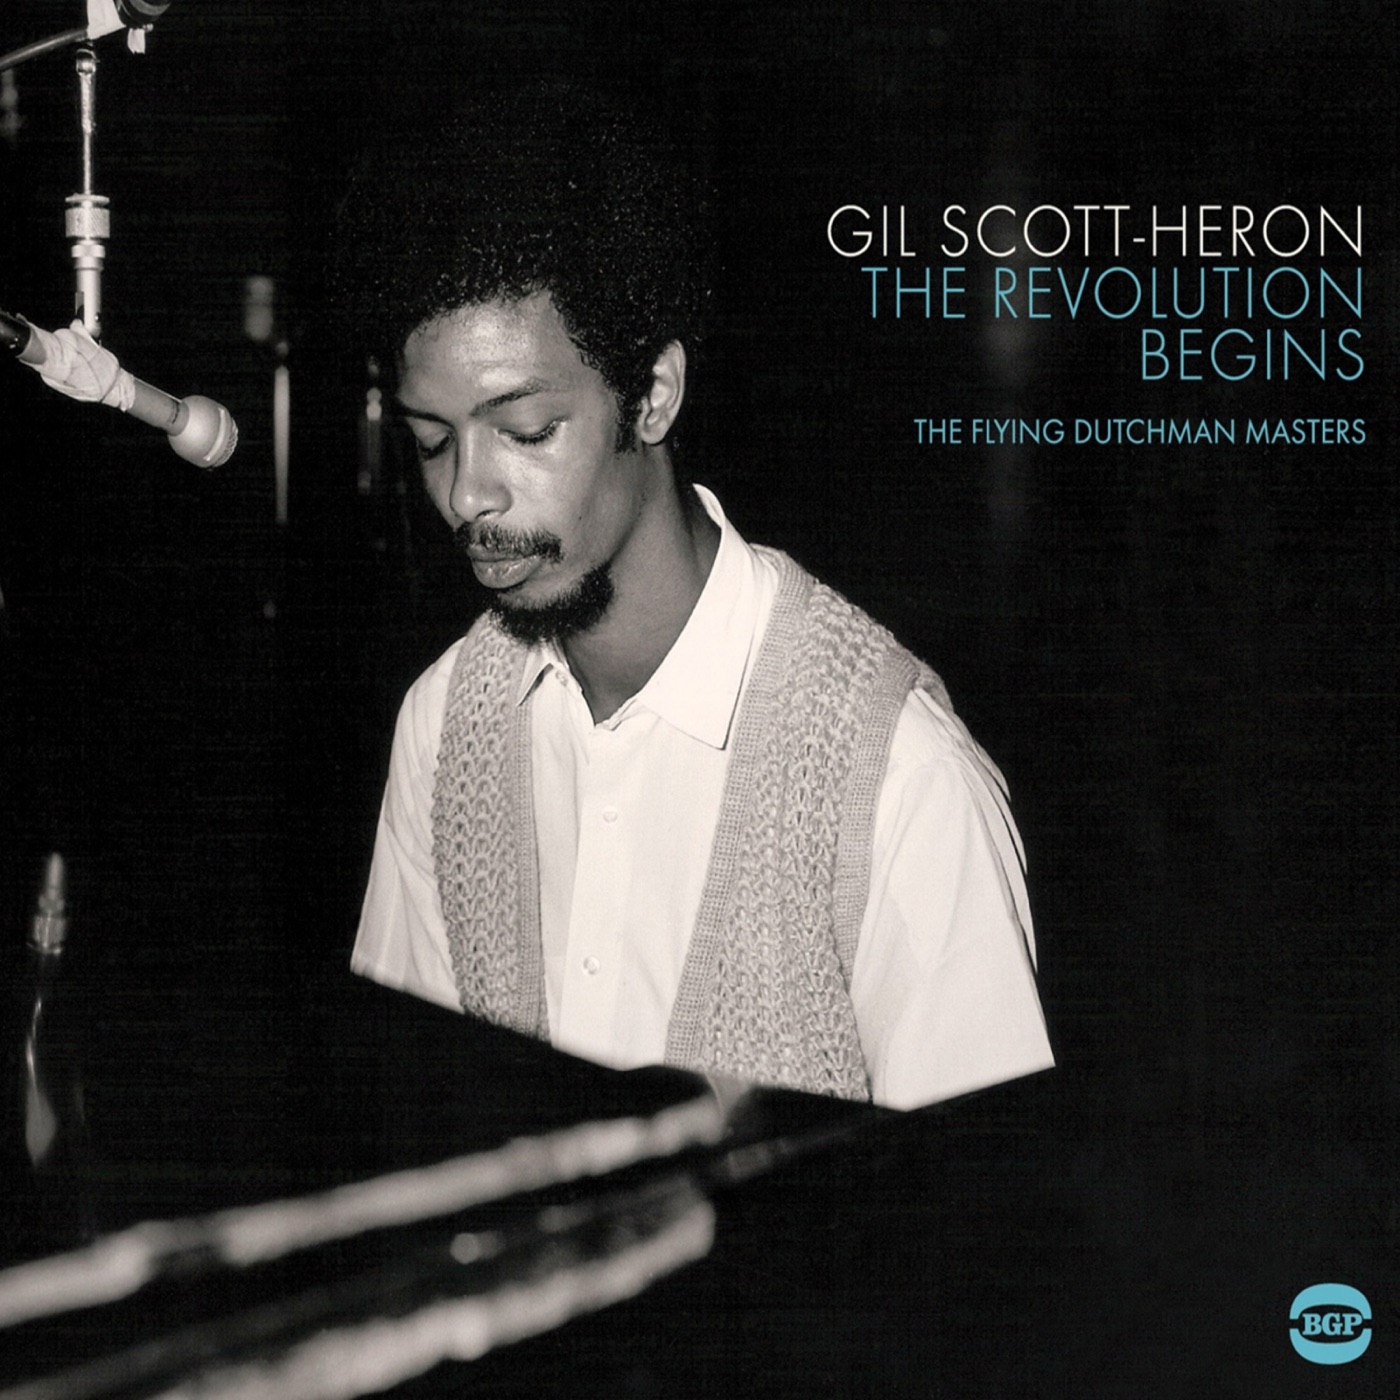 The Revolution Begins: The Flying Dutchman Masters by Gil Scott-Heron